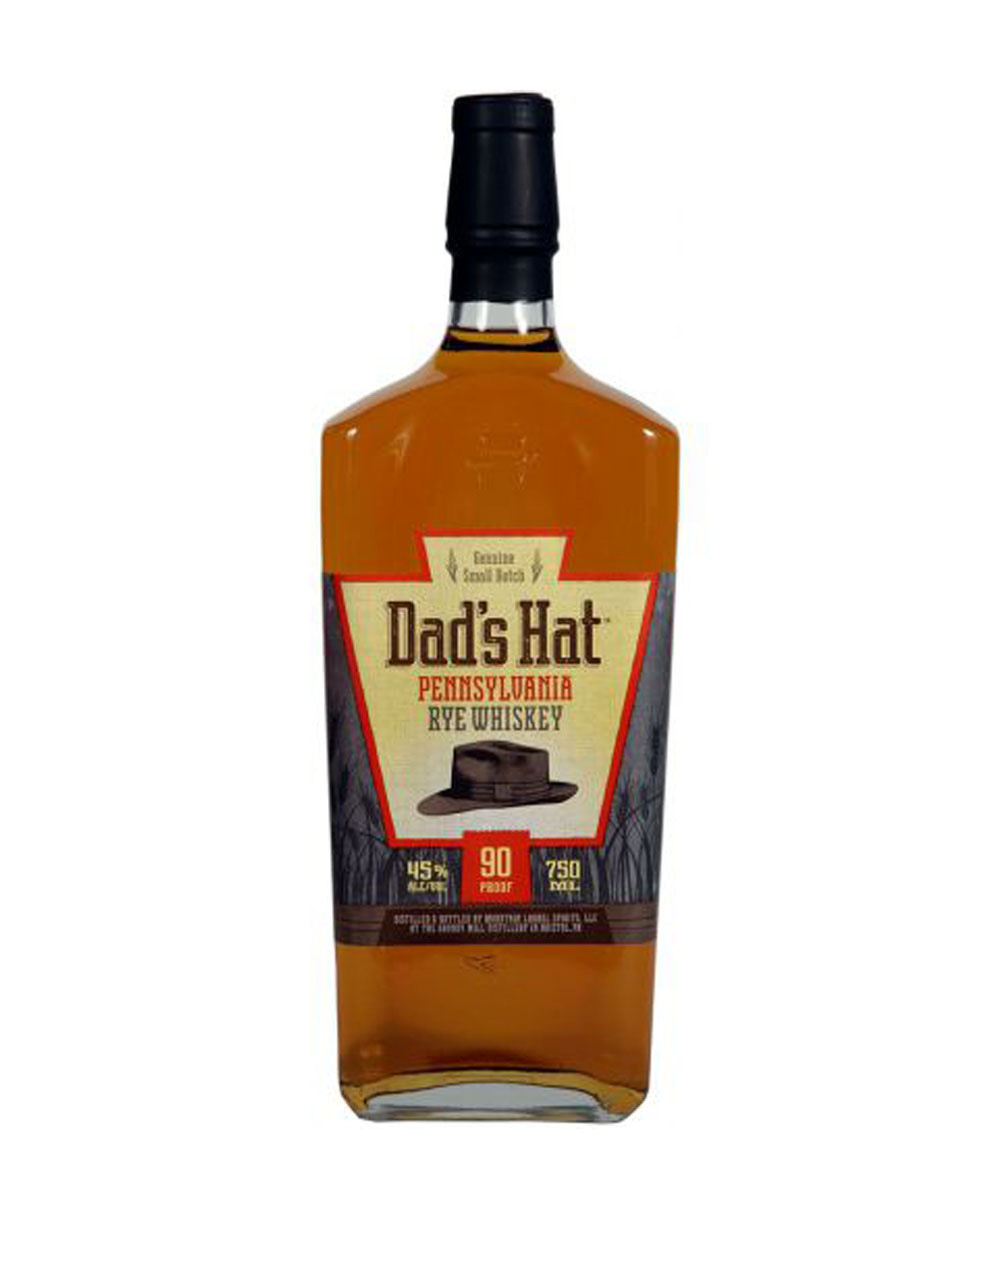 Old Grand Dad 114 Kentucky Straight Bourbon Whiskey